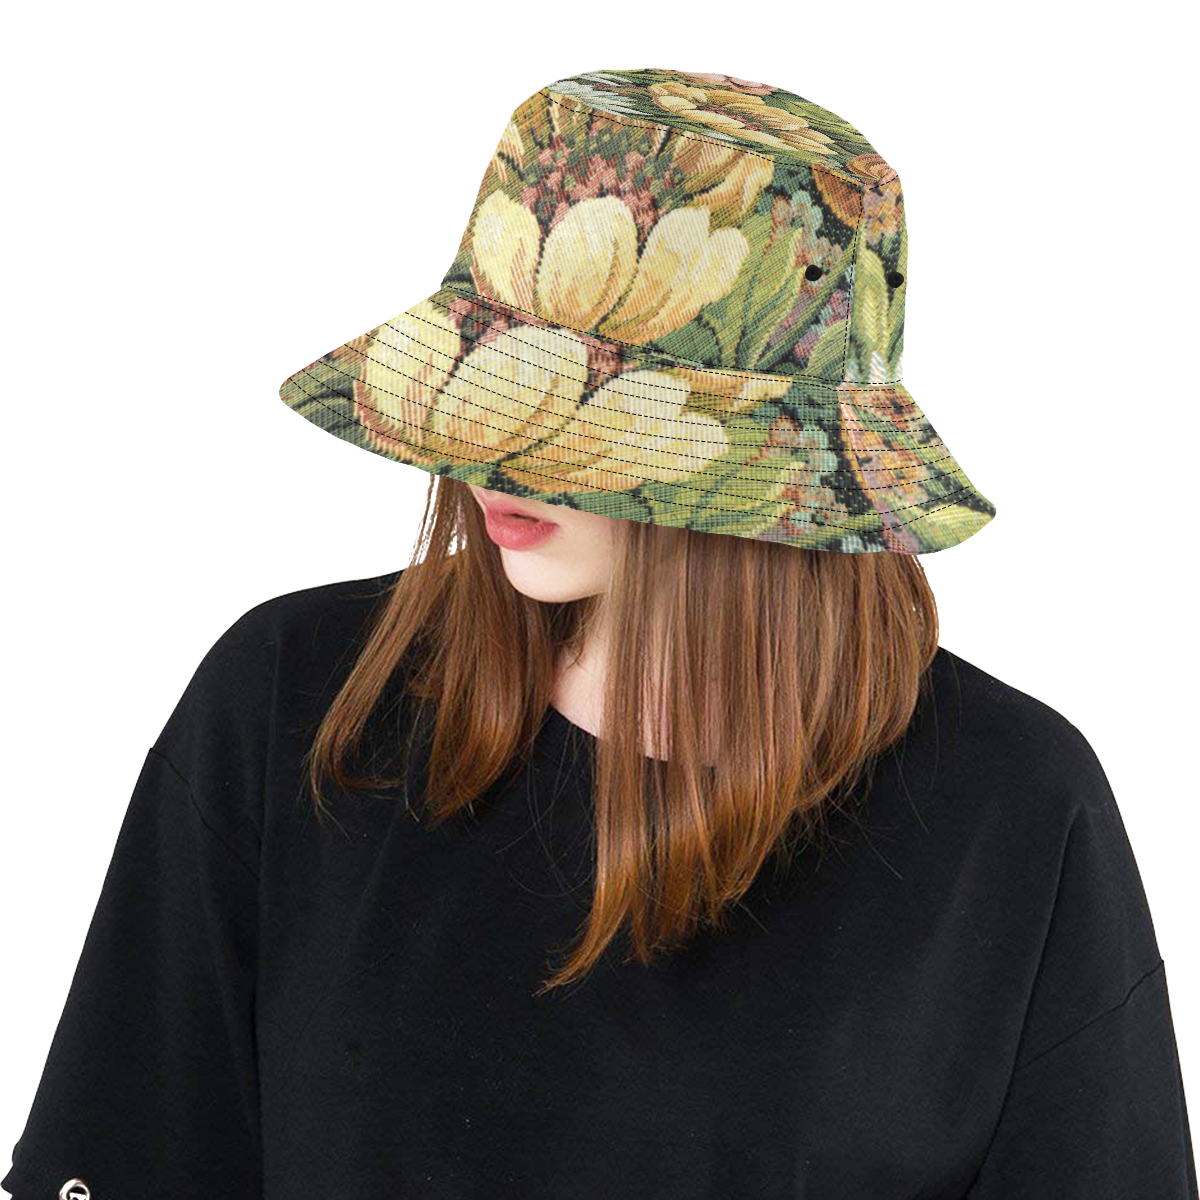 grandma's comfy floral couch All Over Print Bucket Hat